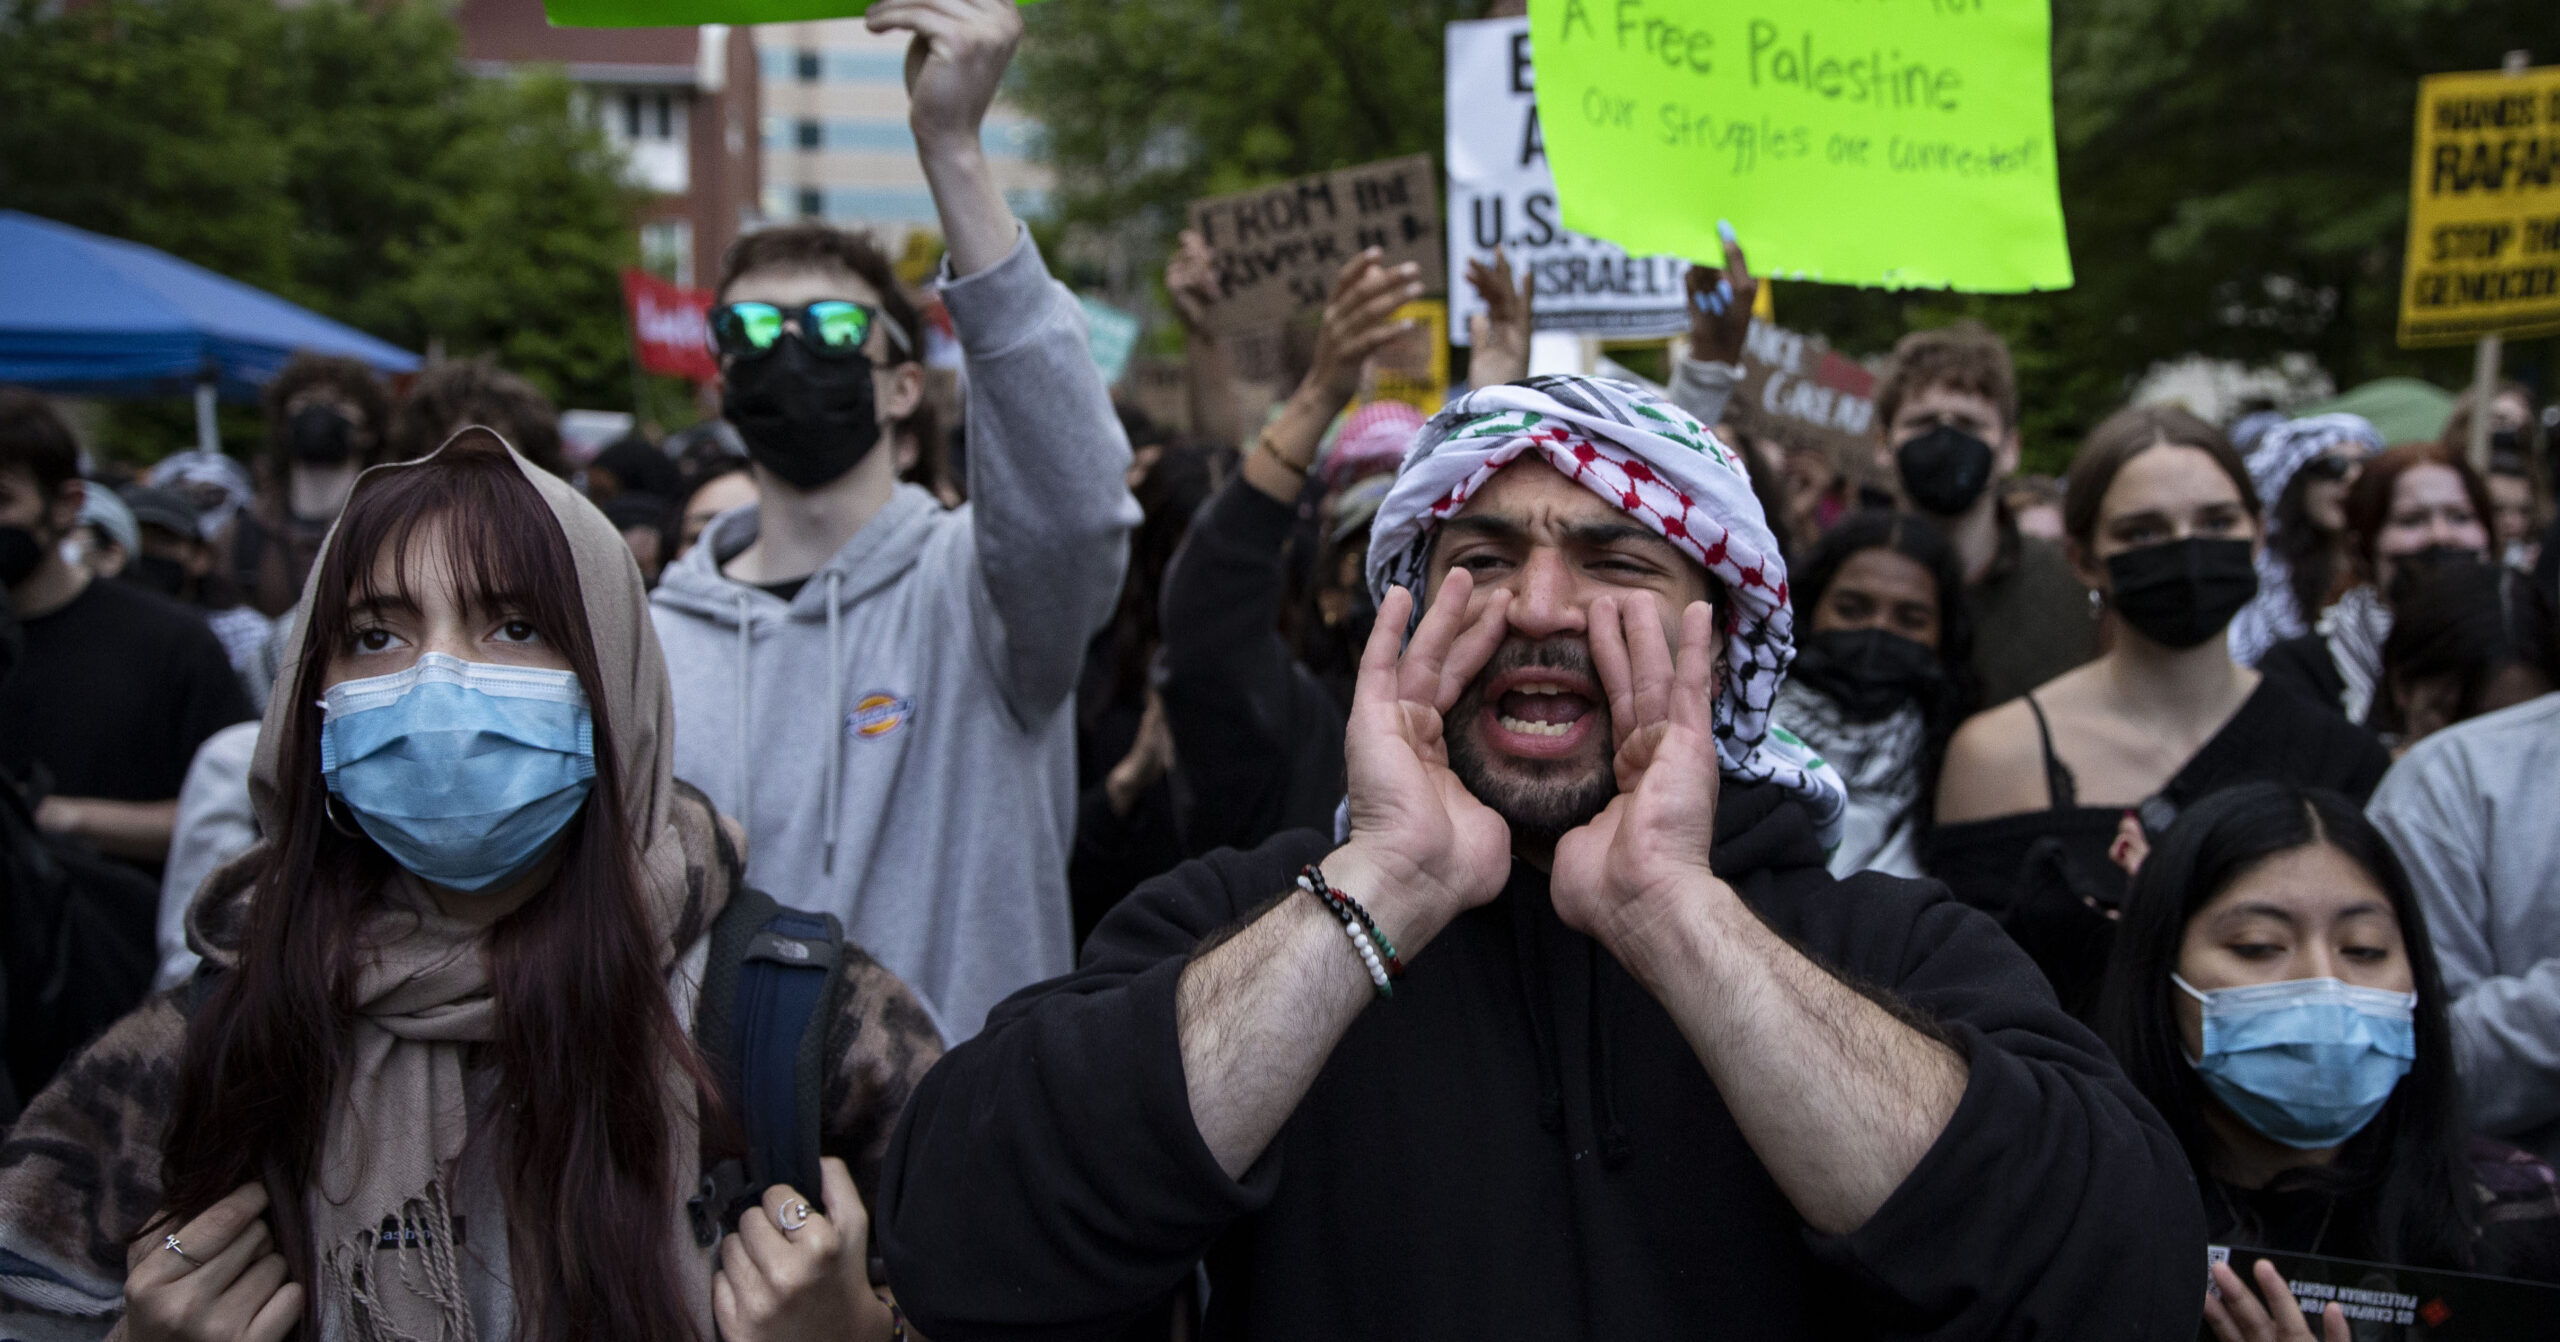 'We Must Have a Revolution': What I Saw at Anti-Israel Rally at George Washington University